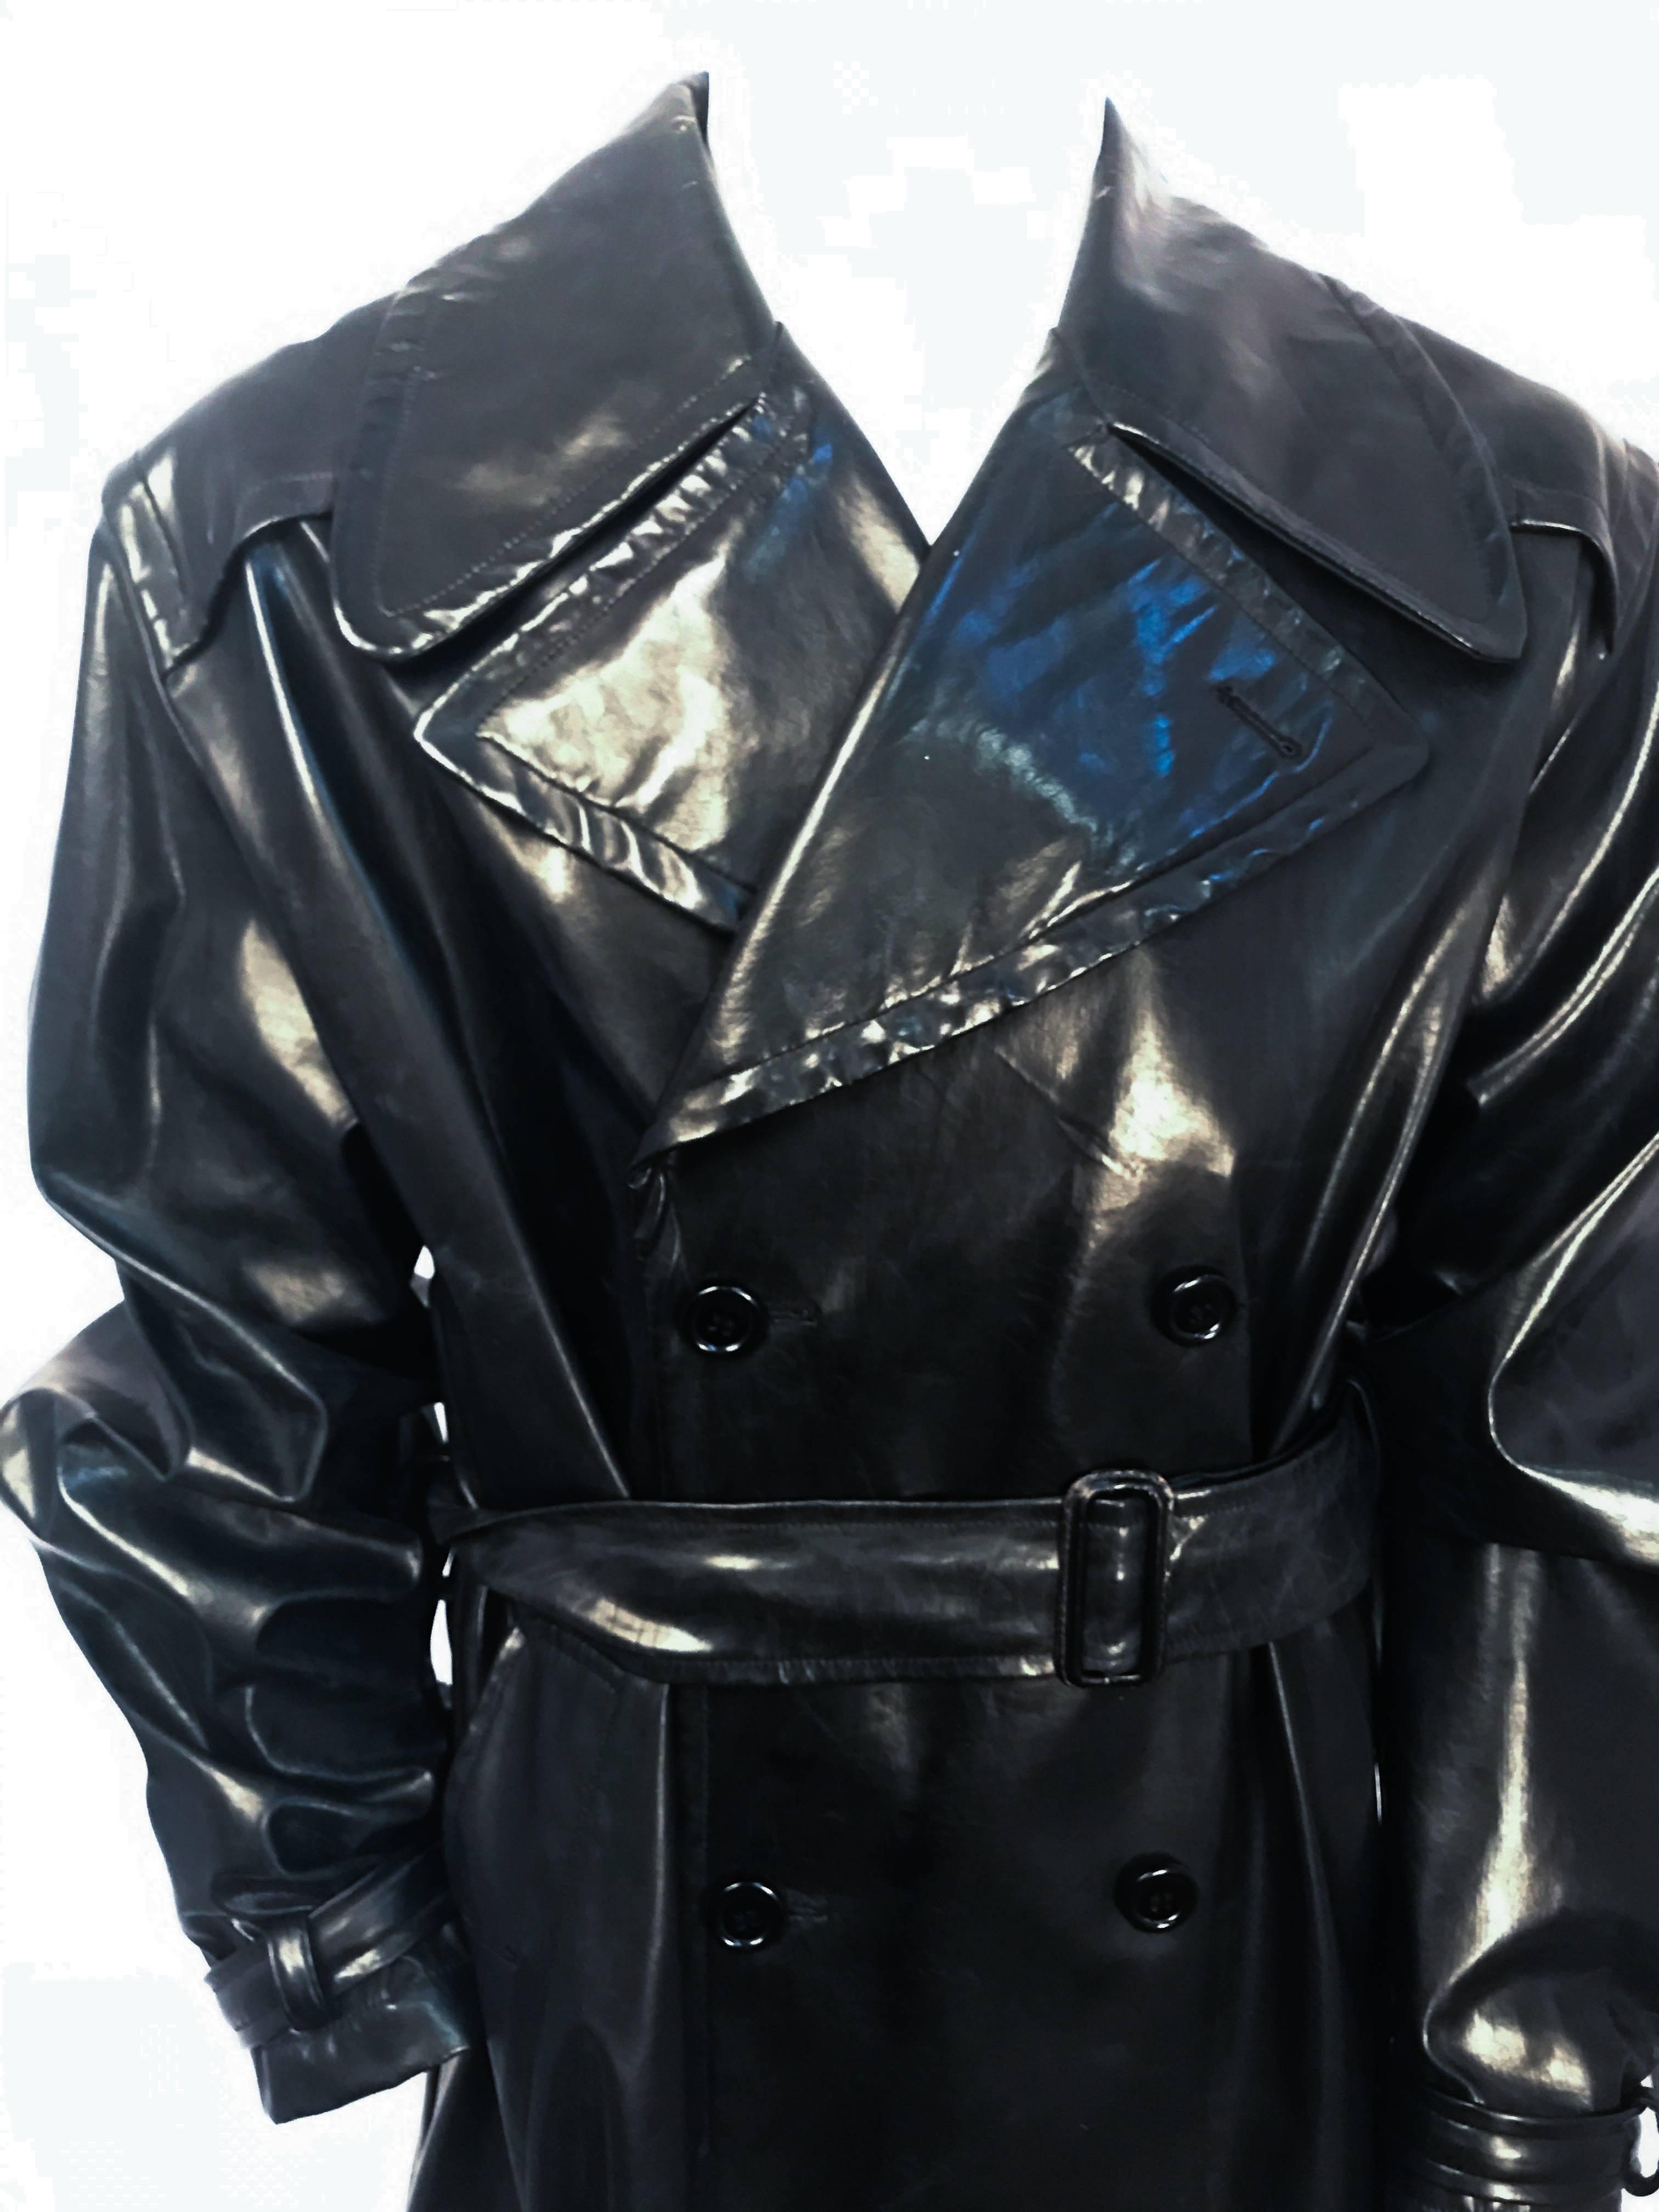 1990s Dolce and Gabbana Black Men's Leather Trench Coat Black waxed black leather trench coat with original sash and strapped cuffs.